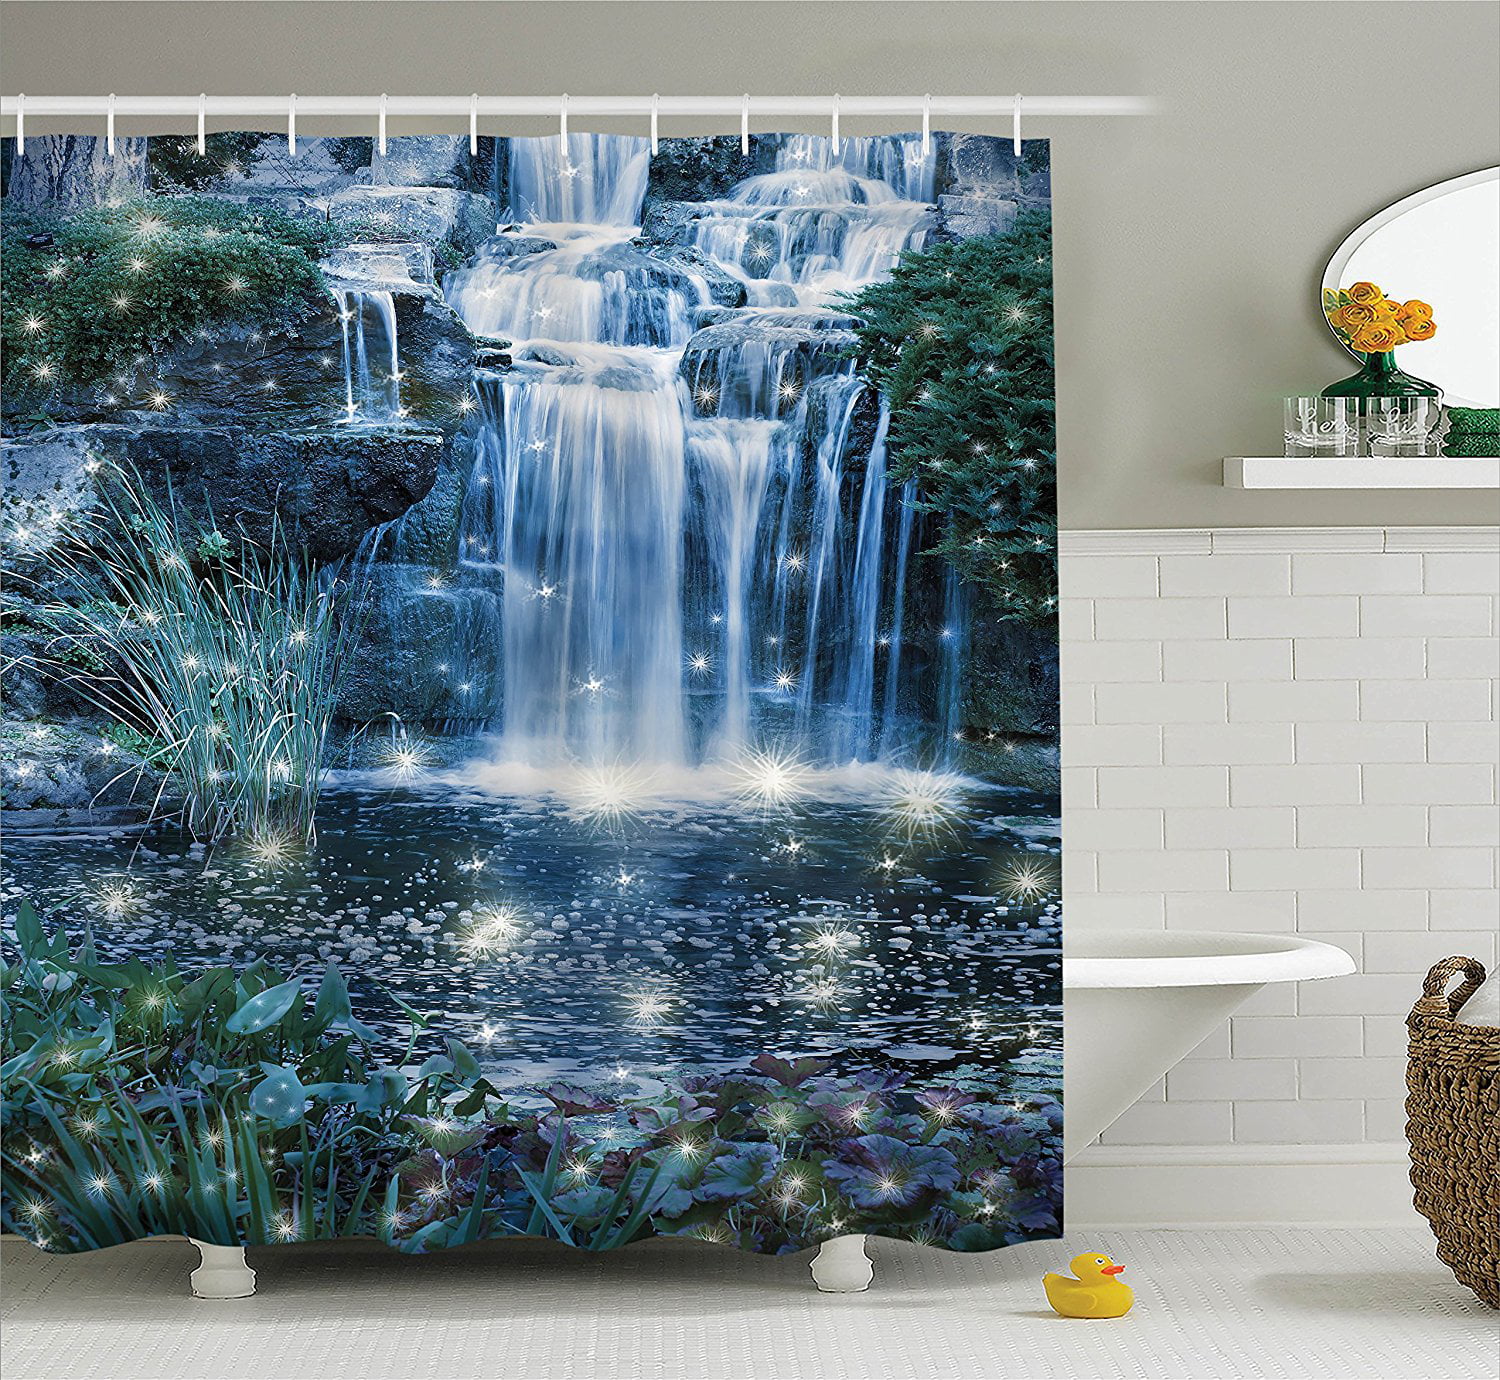 Details about   Black Flying Plane 3D Shower Curtain Waterproof Fabric Bathroom Decoration 